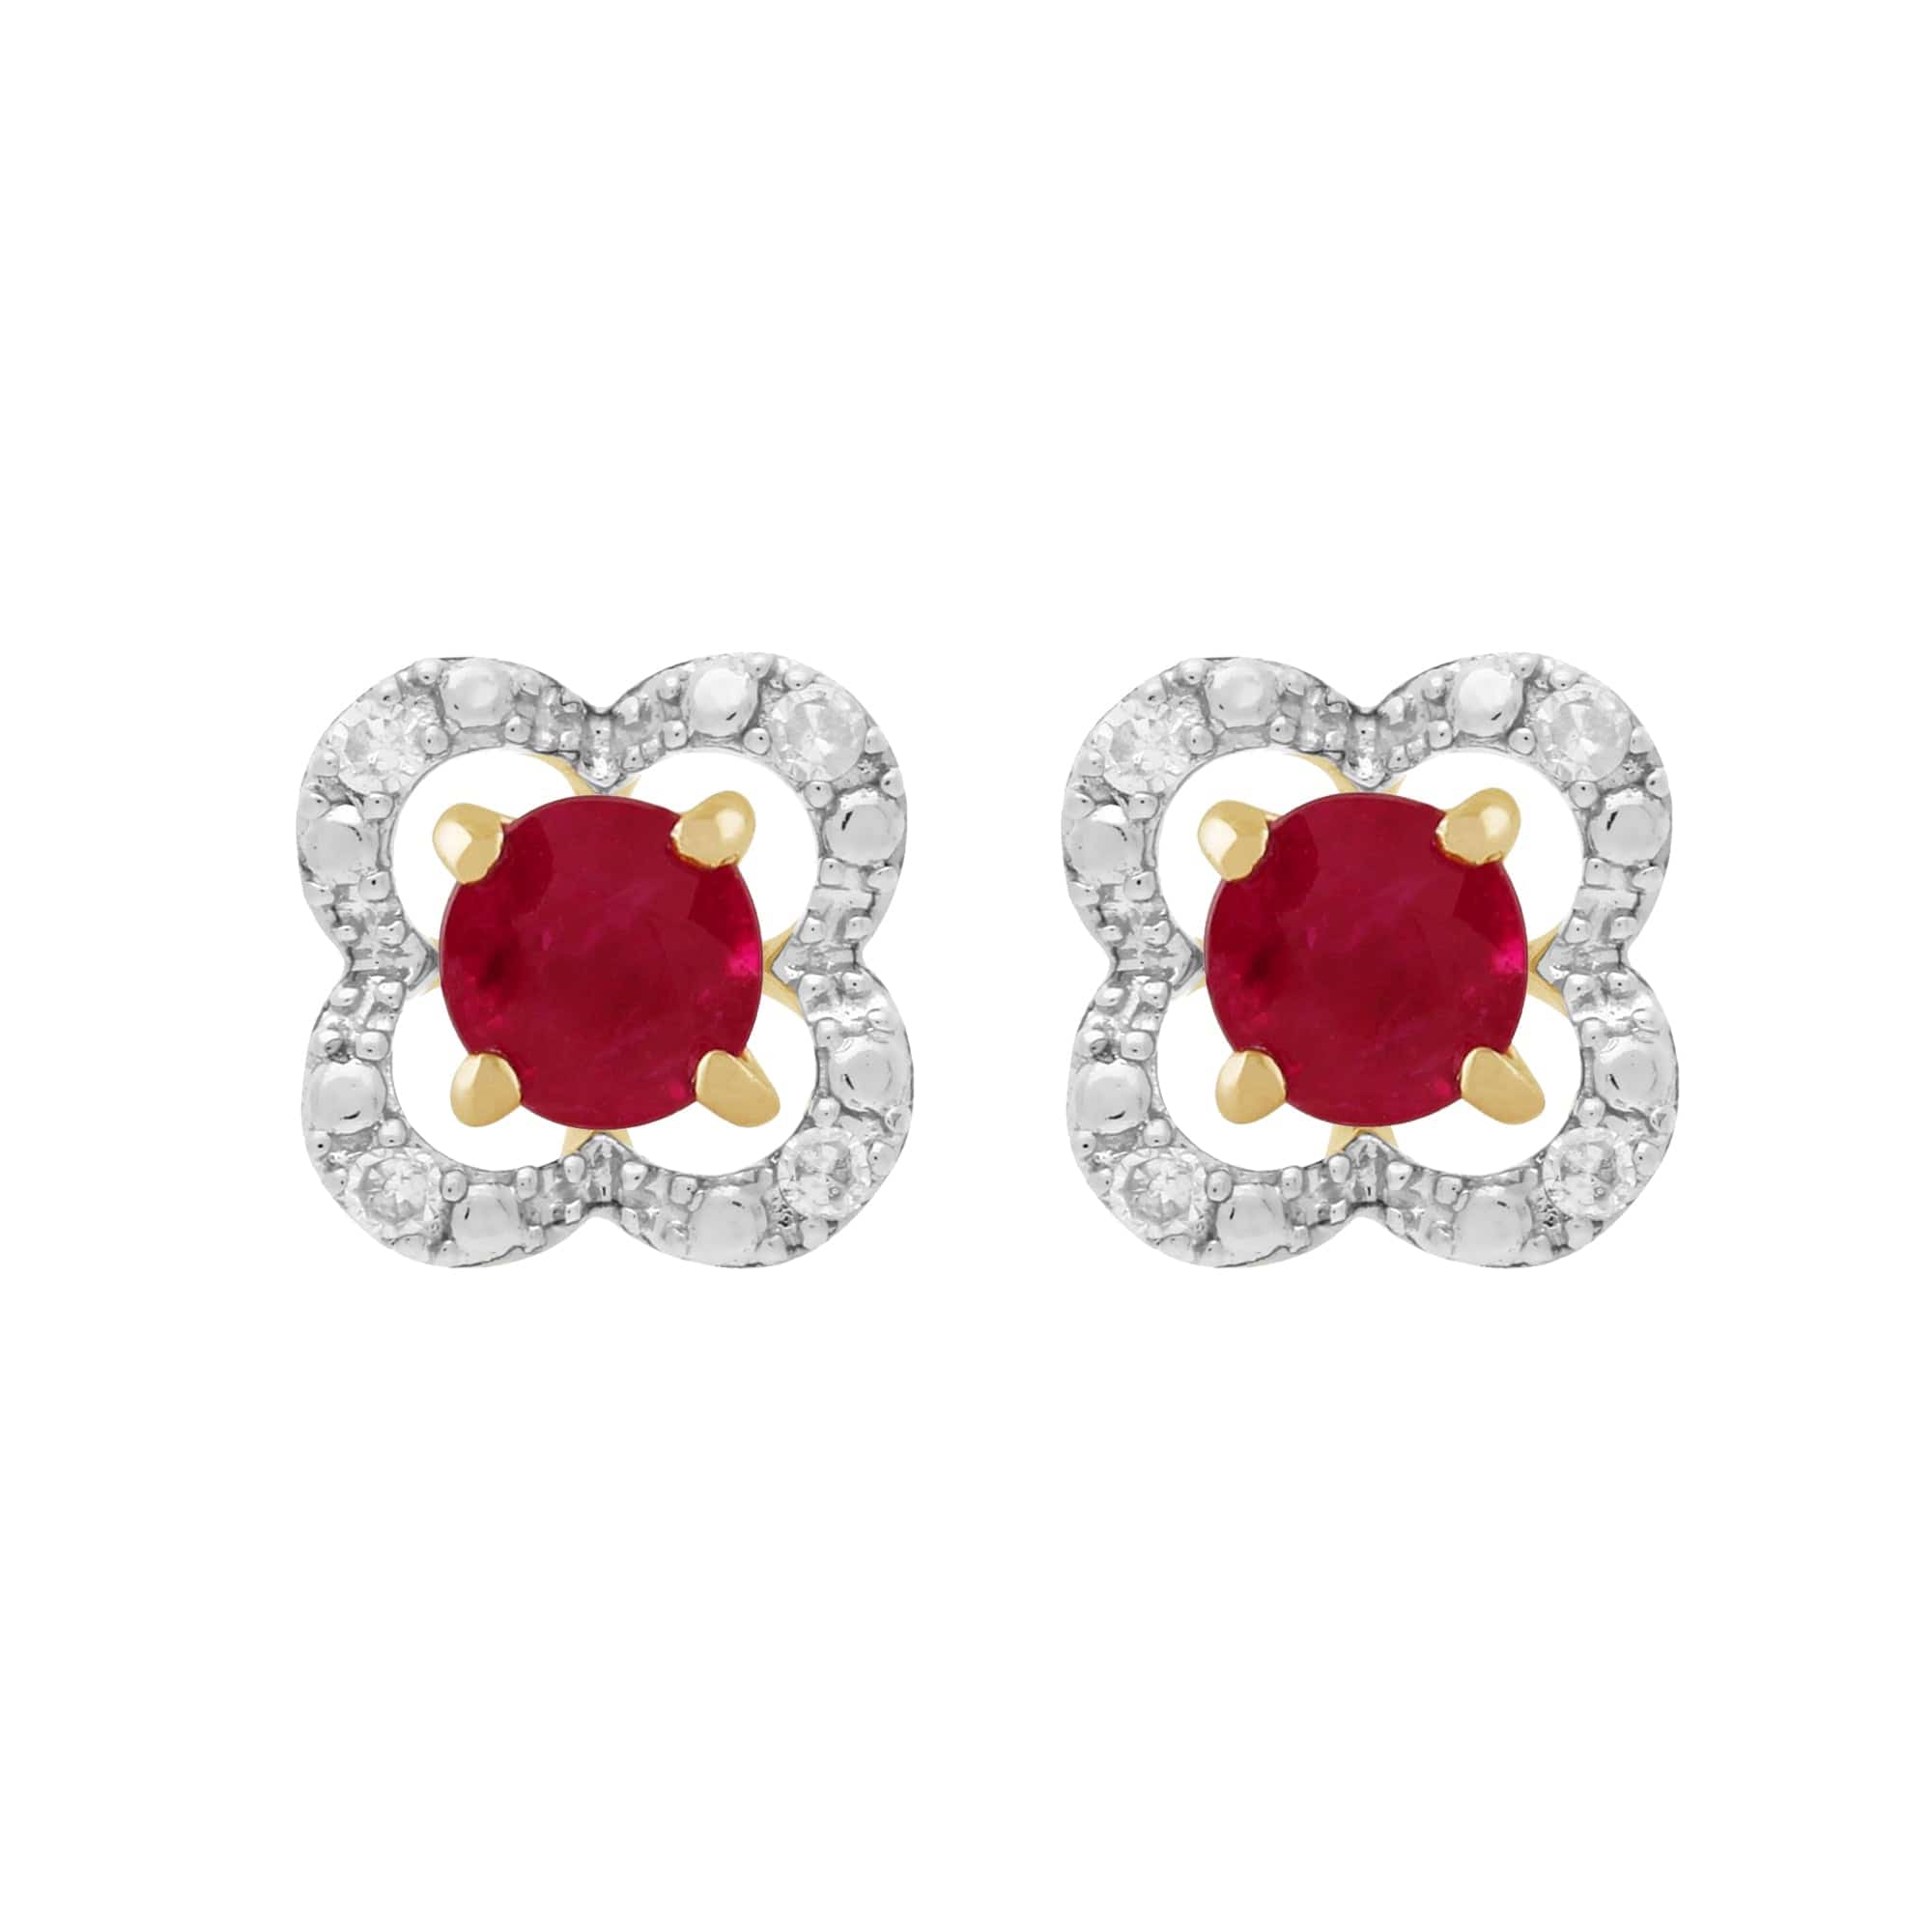 11570-191E0375019 Classic Round Ruby Stud Earrings with Detachable Diamond Floral Ear Jacket in 9ct Yellow Gold 1